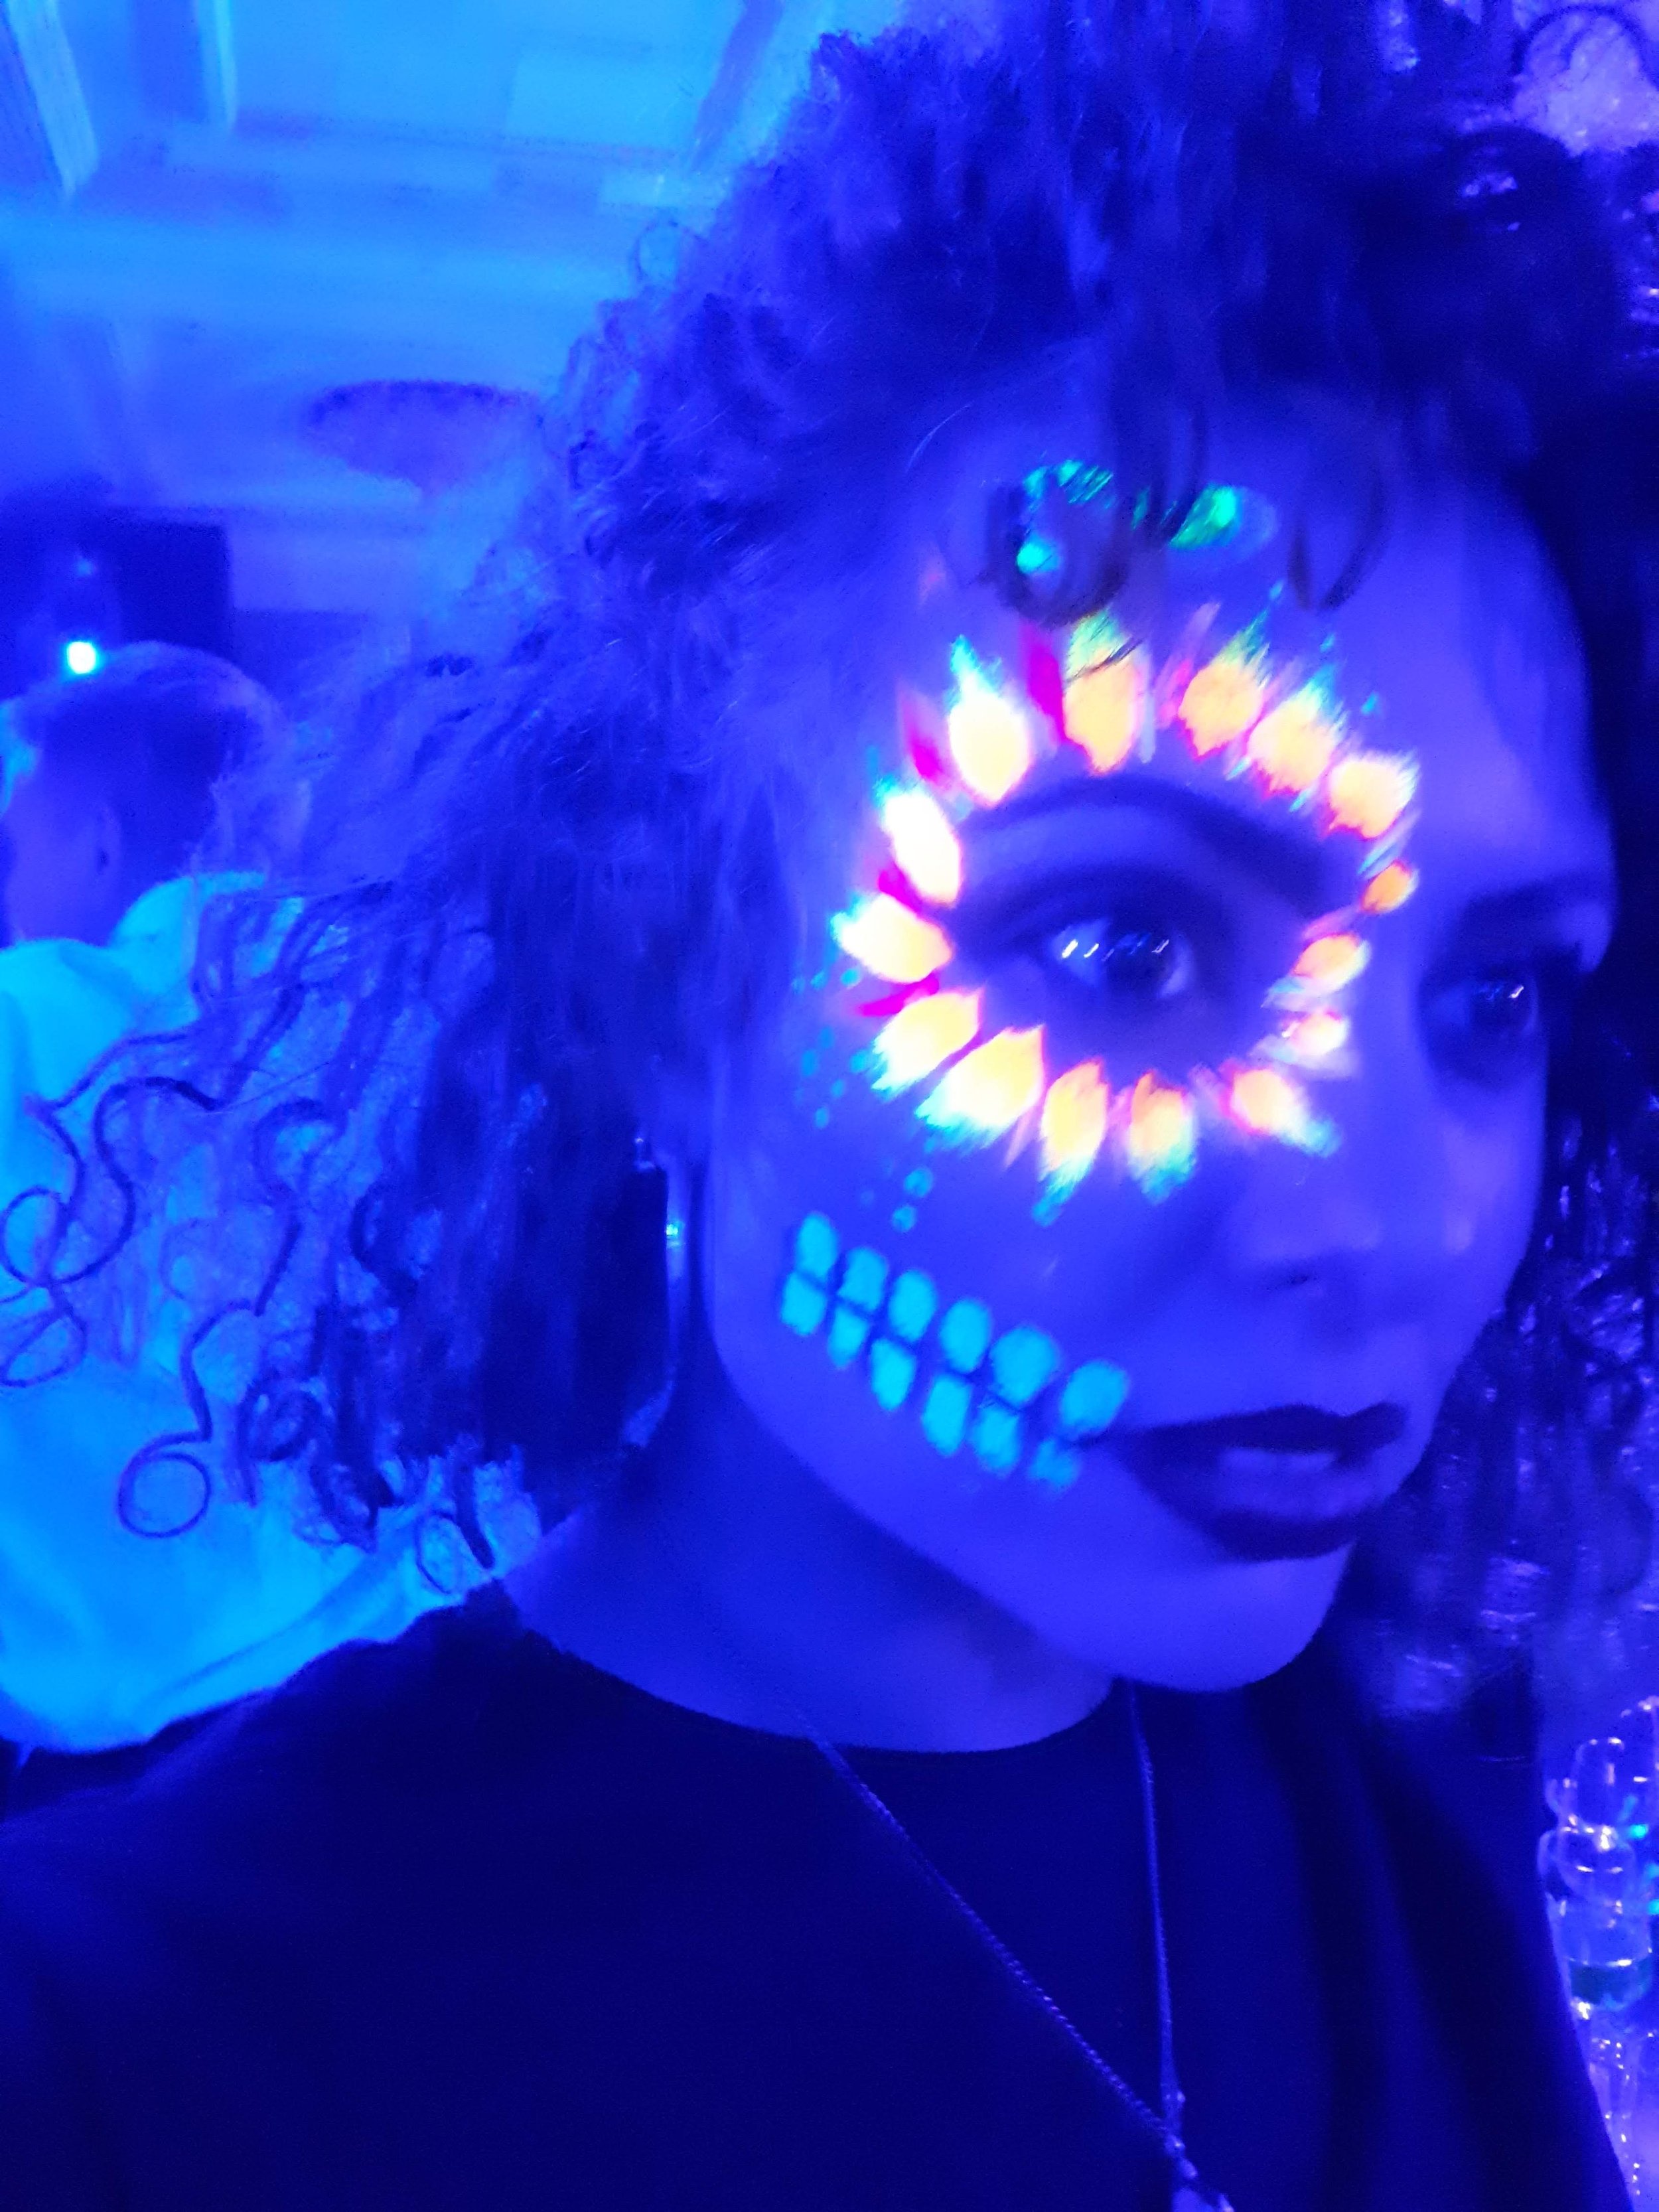  Neon UV paint has been applied to a wedding guest by fun roaming glitter &amp; UV artists at evening wedding reception.   Photo by: Fanny Burgos 